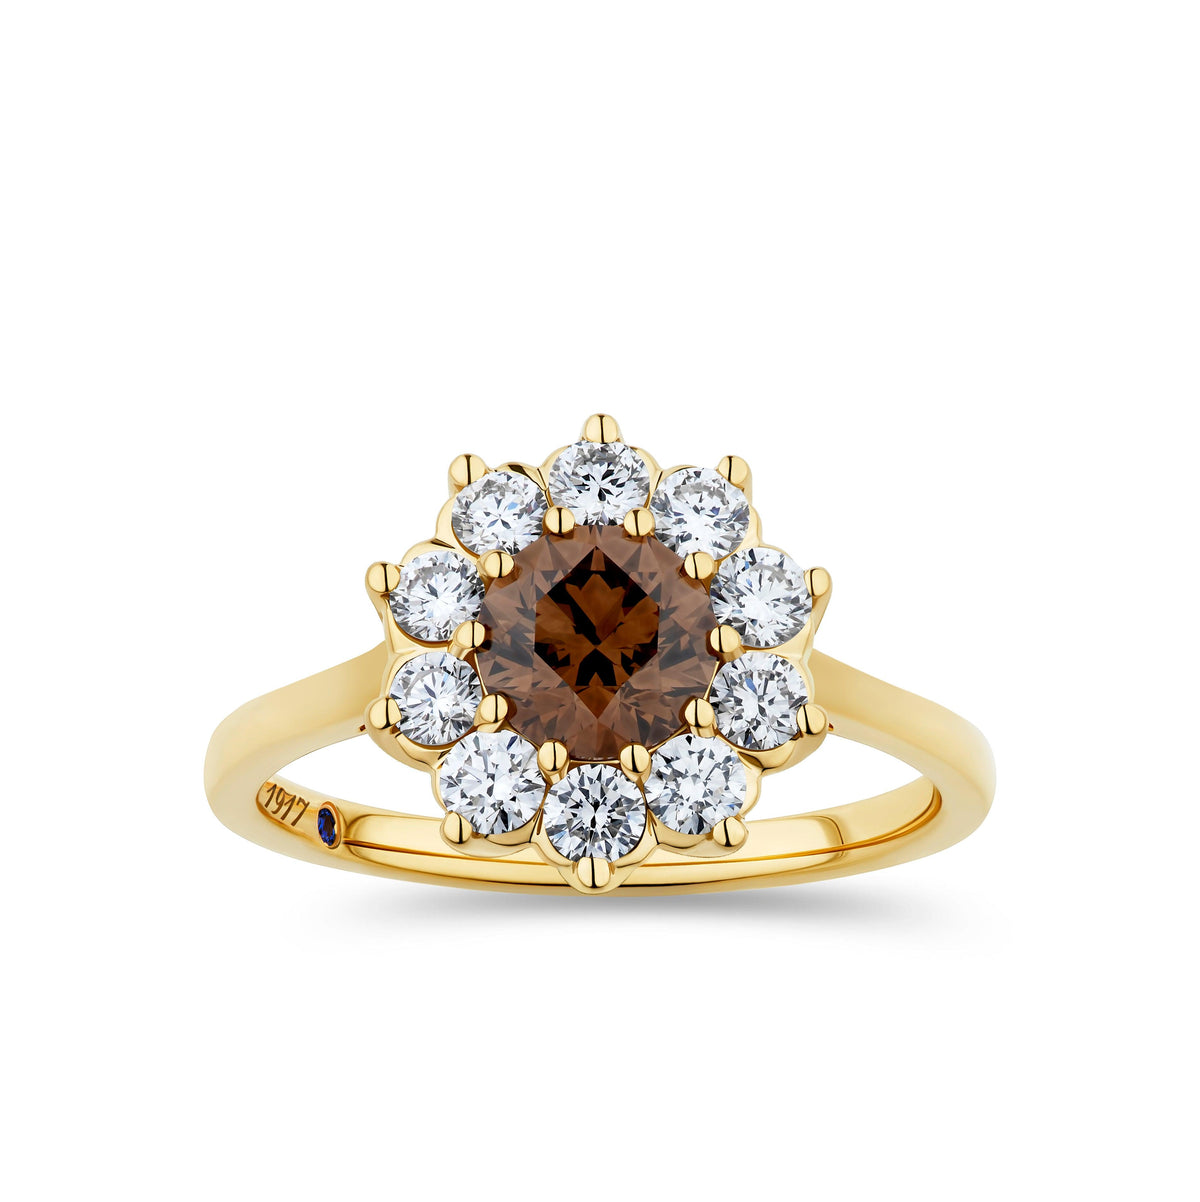 1917™ 1.51ct TW Diamond Flower Halo Engagement Ring in 18ct Yellow Gold - Wallace Bishop